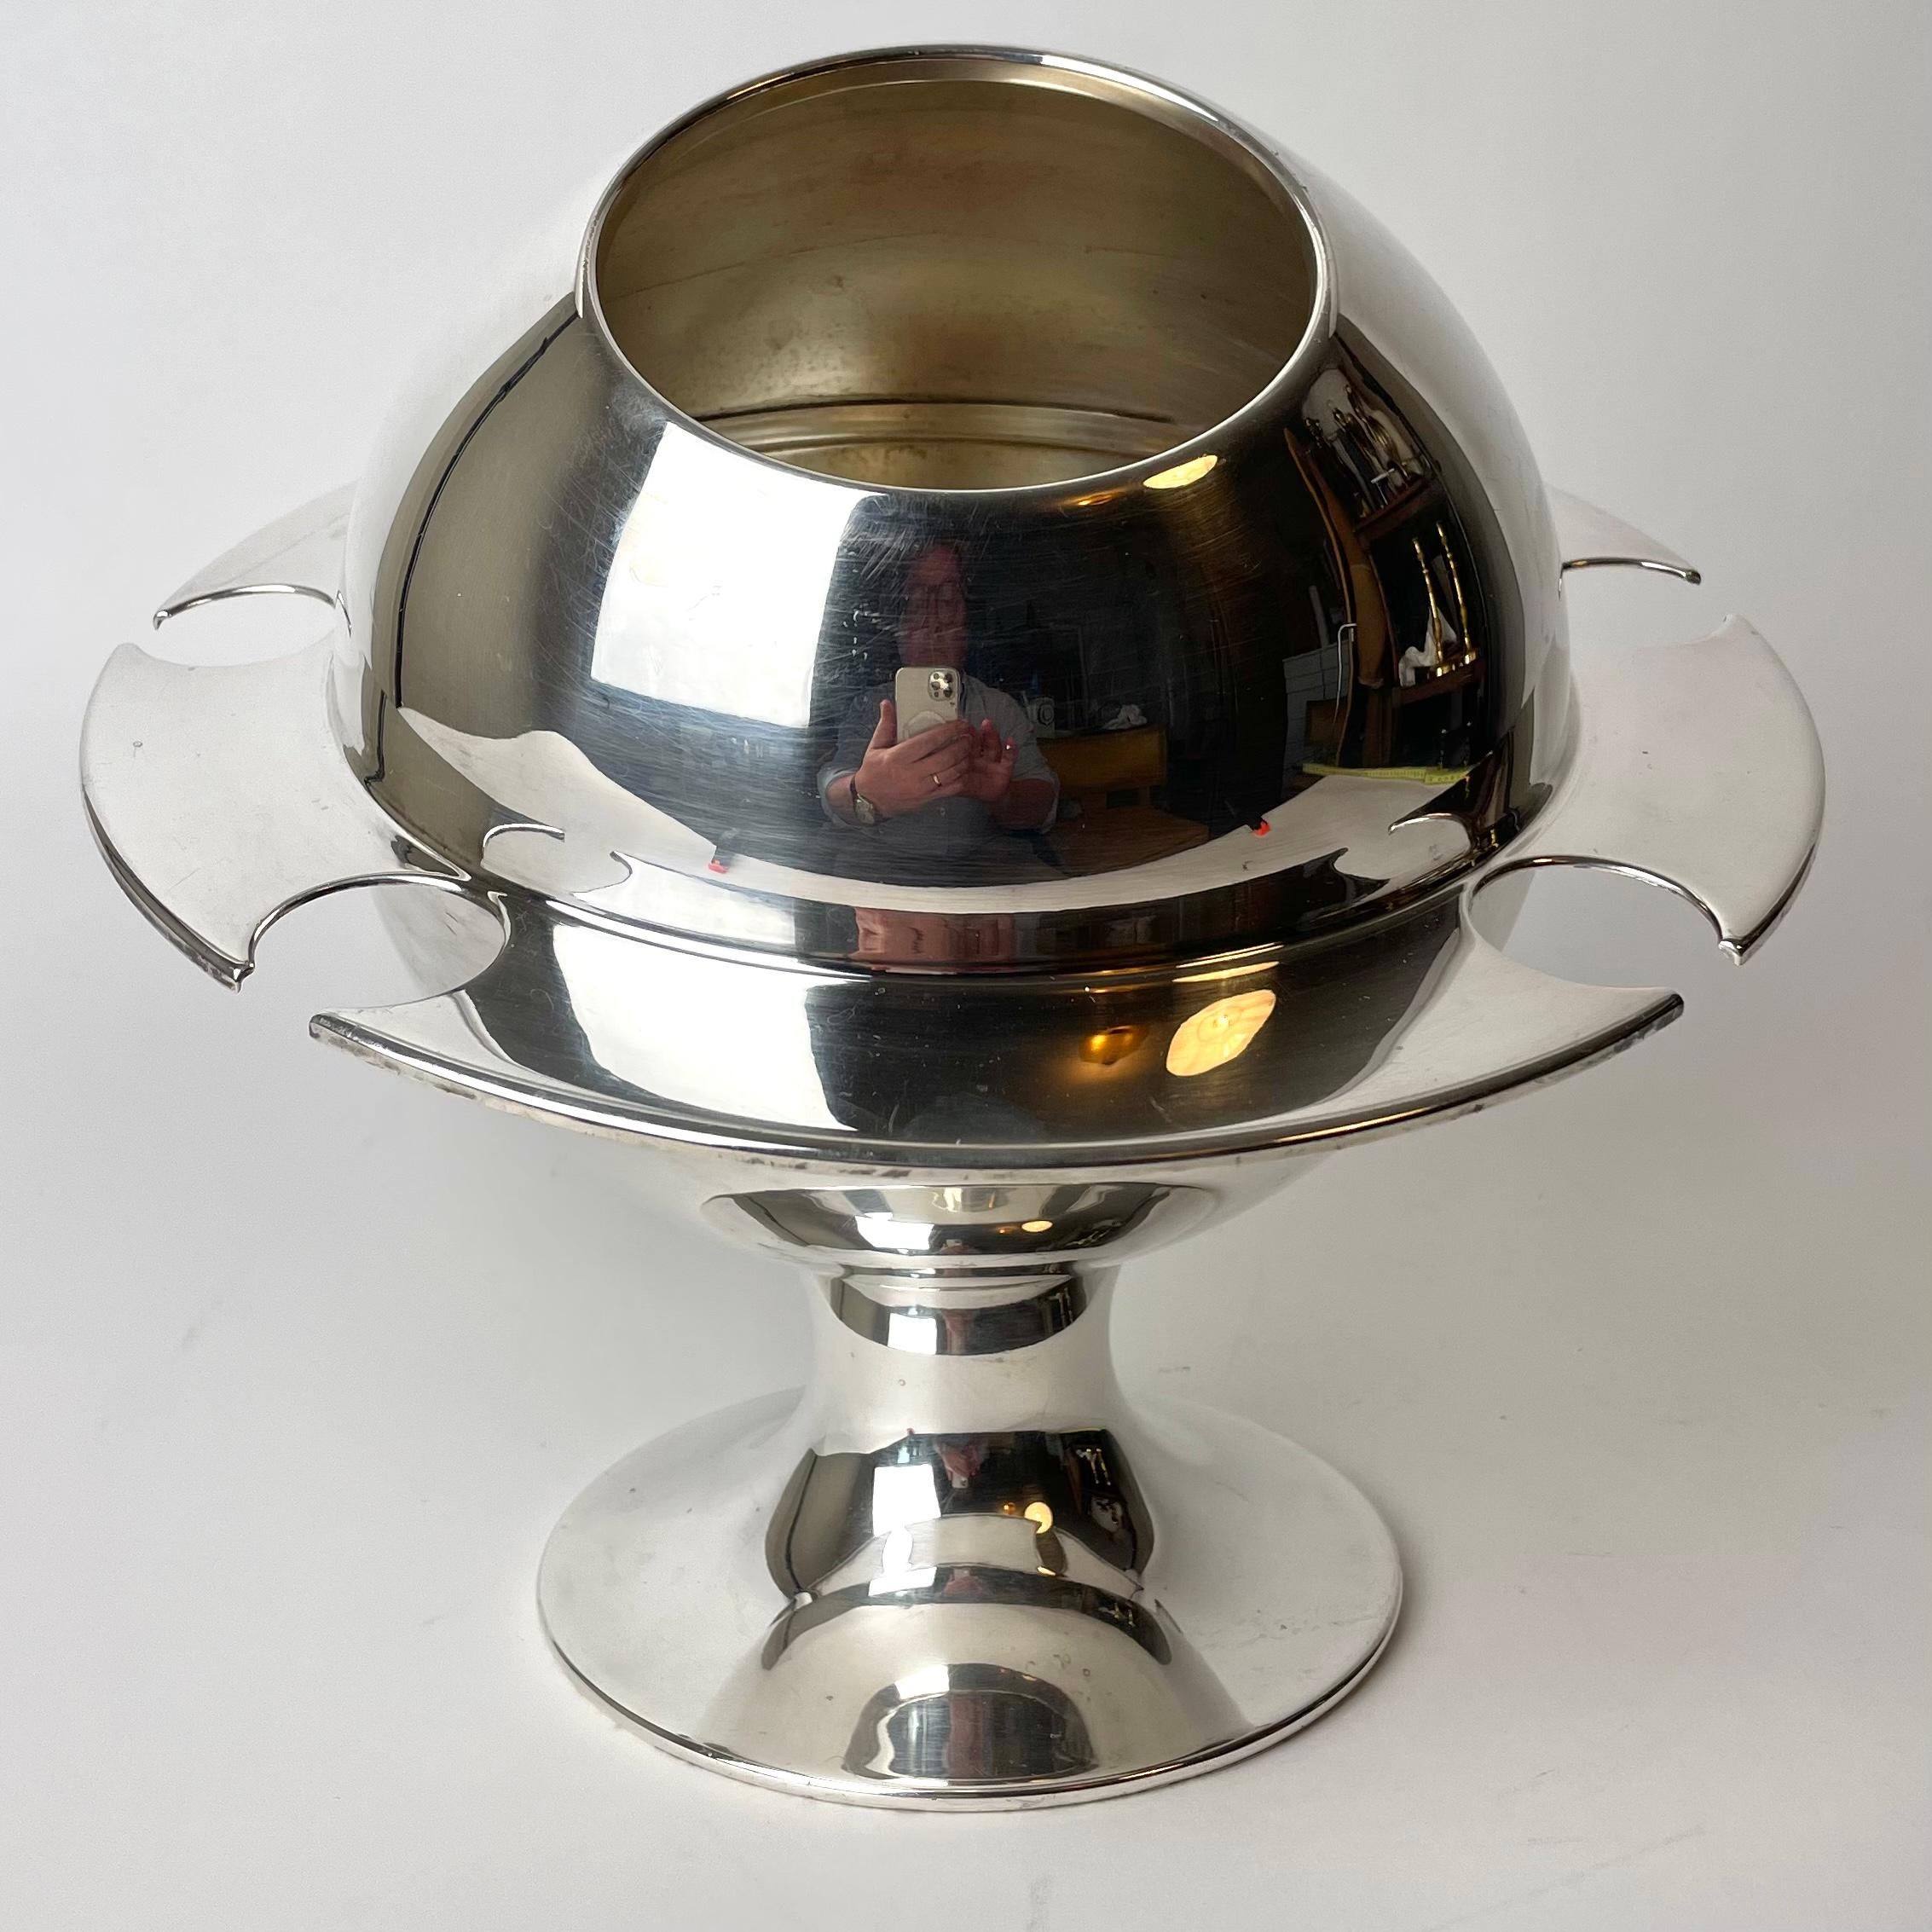 French Cool Champagne Cooler with Glass Rack in Silver Plating, ”Space Age”, 1960s